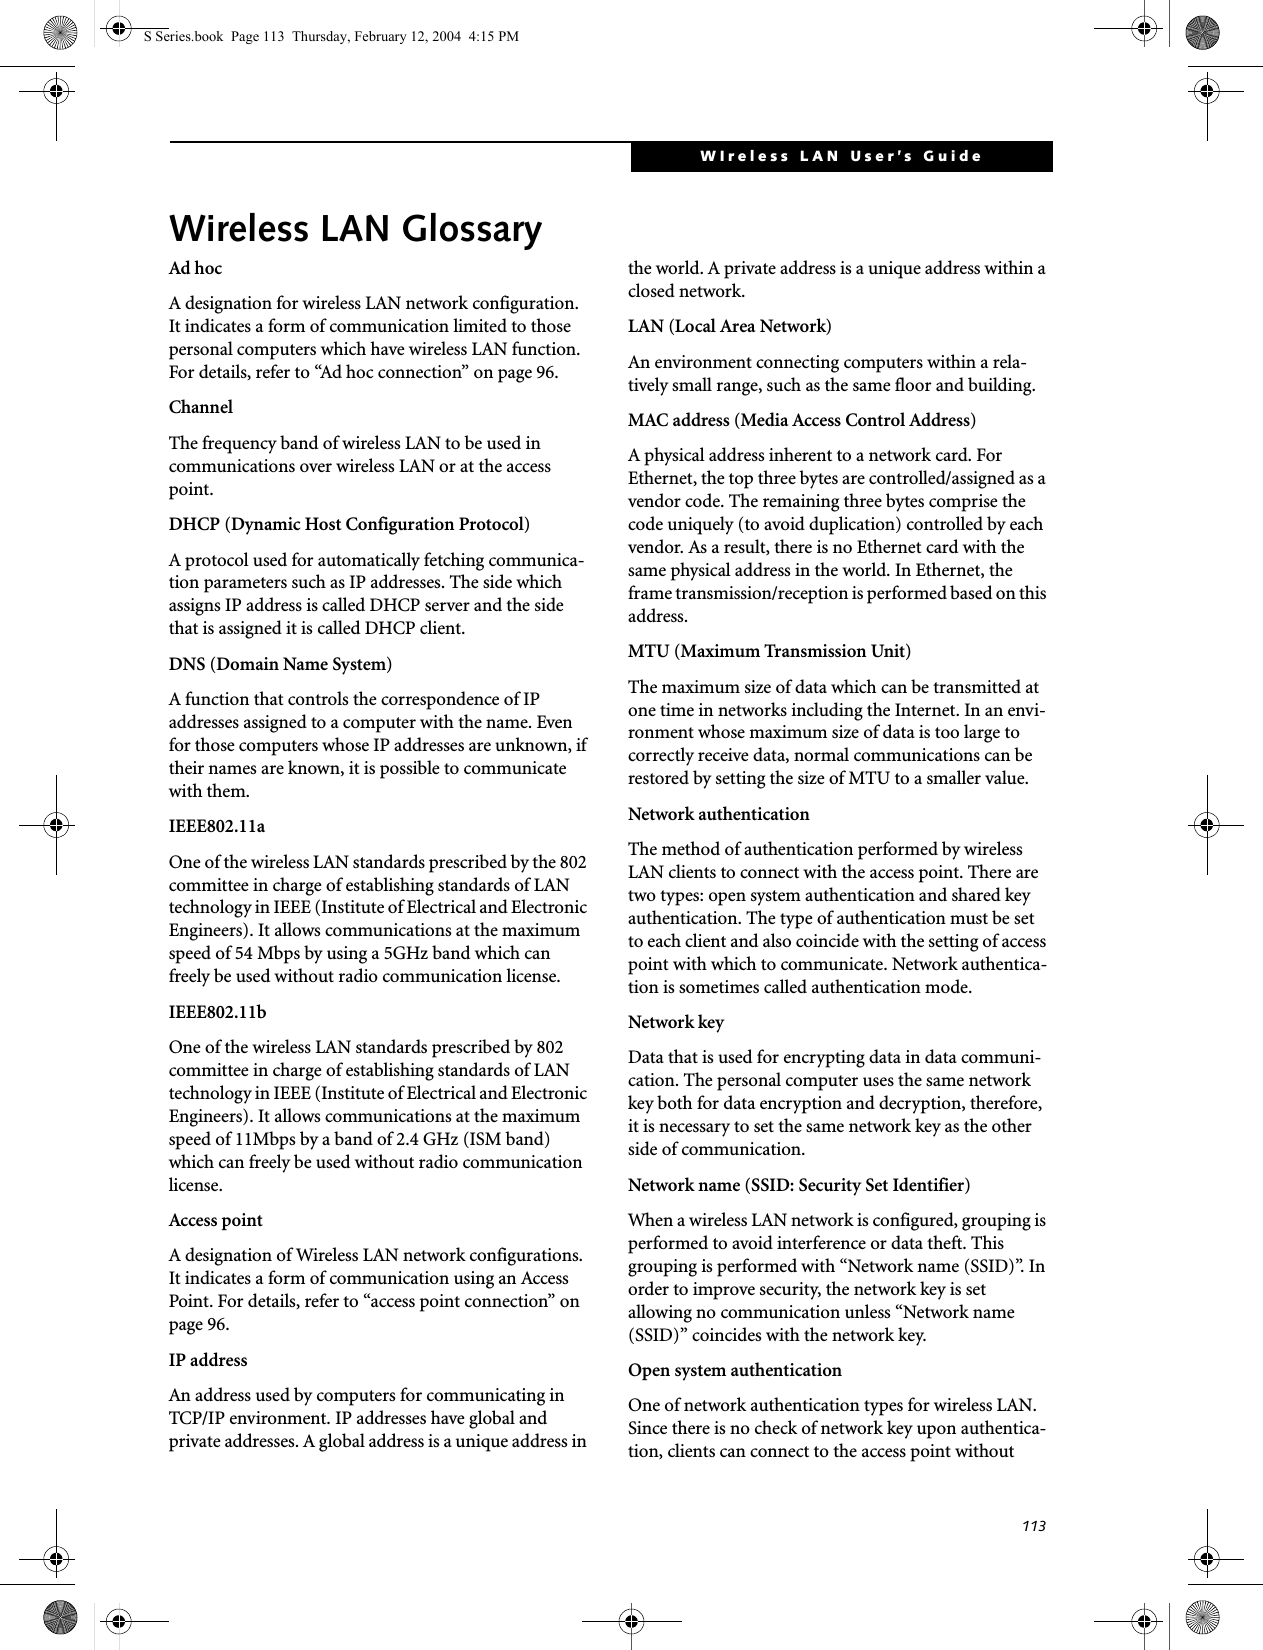 113WIreless LAN User’s Guide Wireless LAN GlossaryAd hocA designation for wireless LAN network configuration. It indicates a form of communication limited to those personal computers which have wireless LAN function. For details, refer to “Ad hoc connection” on page 96.ChannelThe frequency band of wireless LAN to be used in communications over wireless LAN or at the access point.DHCP (Dynamic Host Configuration Protocol)A protocol used for automatically fetching communica-tion parameters such as IP addresses. The side which assigns IP address is called DHCP server and the side that is assigned it is called DHCP client.DNS (Domain Name System)A function that controls the correspondence of IP addresses assigned to a computer with the name. Even for those computers whose IP addresses are unknown, if their names are known, it is possible to communicate with them.IEEE802.11aOne of the wireless LAN standards prescribed by the 802 committee in charge of establishing standards of LAN technology in IEEE (Institute of Electrical and Electronic Engineers). It allows communications at the maximum speed of 54 Mbps by using a 5GHz band which can freely be used without radio communication license. IEEE802.11bOne of the wireless LAN standards prescribed by 802 committee in charge of establishing standards of LAN technology in IEEE (Institute of Electrical and Electronic Engineers). It allows communications at the maximum speed of 11Mbps by a band of 2.4 GHz (ISM band) which can freely be used without radio communication license. Access pointA designation of Wireless LAN network configurations. It indicates a form of communication using an Access Point. For details, refer to “access point connection” on page 96.IP addressAn address used by computers for communicating in TCP/IP environment. IP addresses have global and private addresses. A global address is a unique address in the world. A private address is a unique address within a closed network.LAN (Local Area Network)An environment connecting computers within a rela-tively small range, such as the same floor and building.MAC address (Media Access Control Address)A physical address inherent to a network card. For Ethernet, the top three bytes are controlled/assigned as a vendor code. The remaining three bytes comprise the code uniquely (to avoid duplication) controlled by each vendor. As a result, there is no Ethernet card with the same physical address in the world. In Ethernet, the frame transmission/reception is performed based on this address.MTU (Maximum Transmission Unit)The maximum size of data which can be transmitted at one time in networks including the Internet. In an envi-ronment whose maximum size of data is too large to correctly receive data, normal communications can be restored by setting the size of MTU to a smaller value.Network authenticationThe method of authentication performed by wireless LAN clients to connect with the access point. There are two types: open system authentication and shared key authentication. The type of authentication must be set to each client and also coincide with the setting of access point with which to communicate. Network authentica-tion is sometimes called authentication mode.Network keyData that is used for encrypting data in data communi-cation. The personal computer uses the same network key both for data encryption and decryption, therefore, it is necessary to set the same network key as the other side of communication.Network name (SSID: Security Set Identifier)When a wireless LAN network is configured, grouping is performed to avoid interference or data theft. This grouping is performed with “Network name (SSID)”. In order to improve security, the network key is set allowing no communication unless “Network name (SSID)” coincides with the network key.Open system authenticationOne of network authentication types for wireless LAN. Since there is no check of network key upon authentica-tion, clients can connect to the access point without S Series.book  Page 113  Thursday, February 12, 2004  4:15 PM